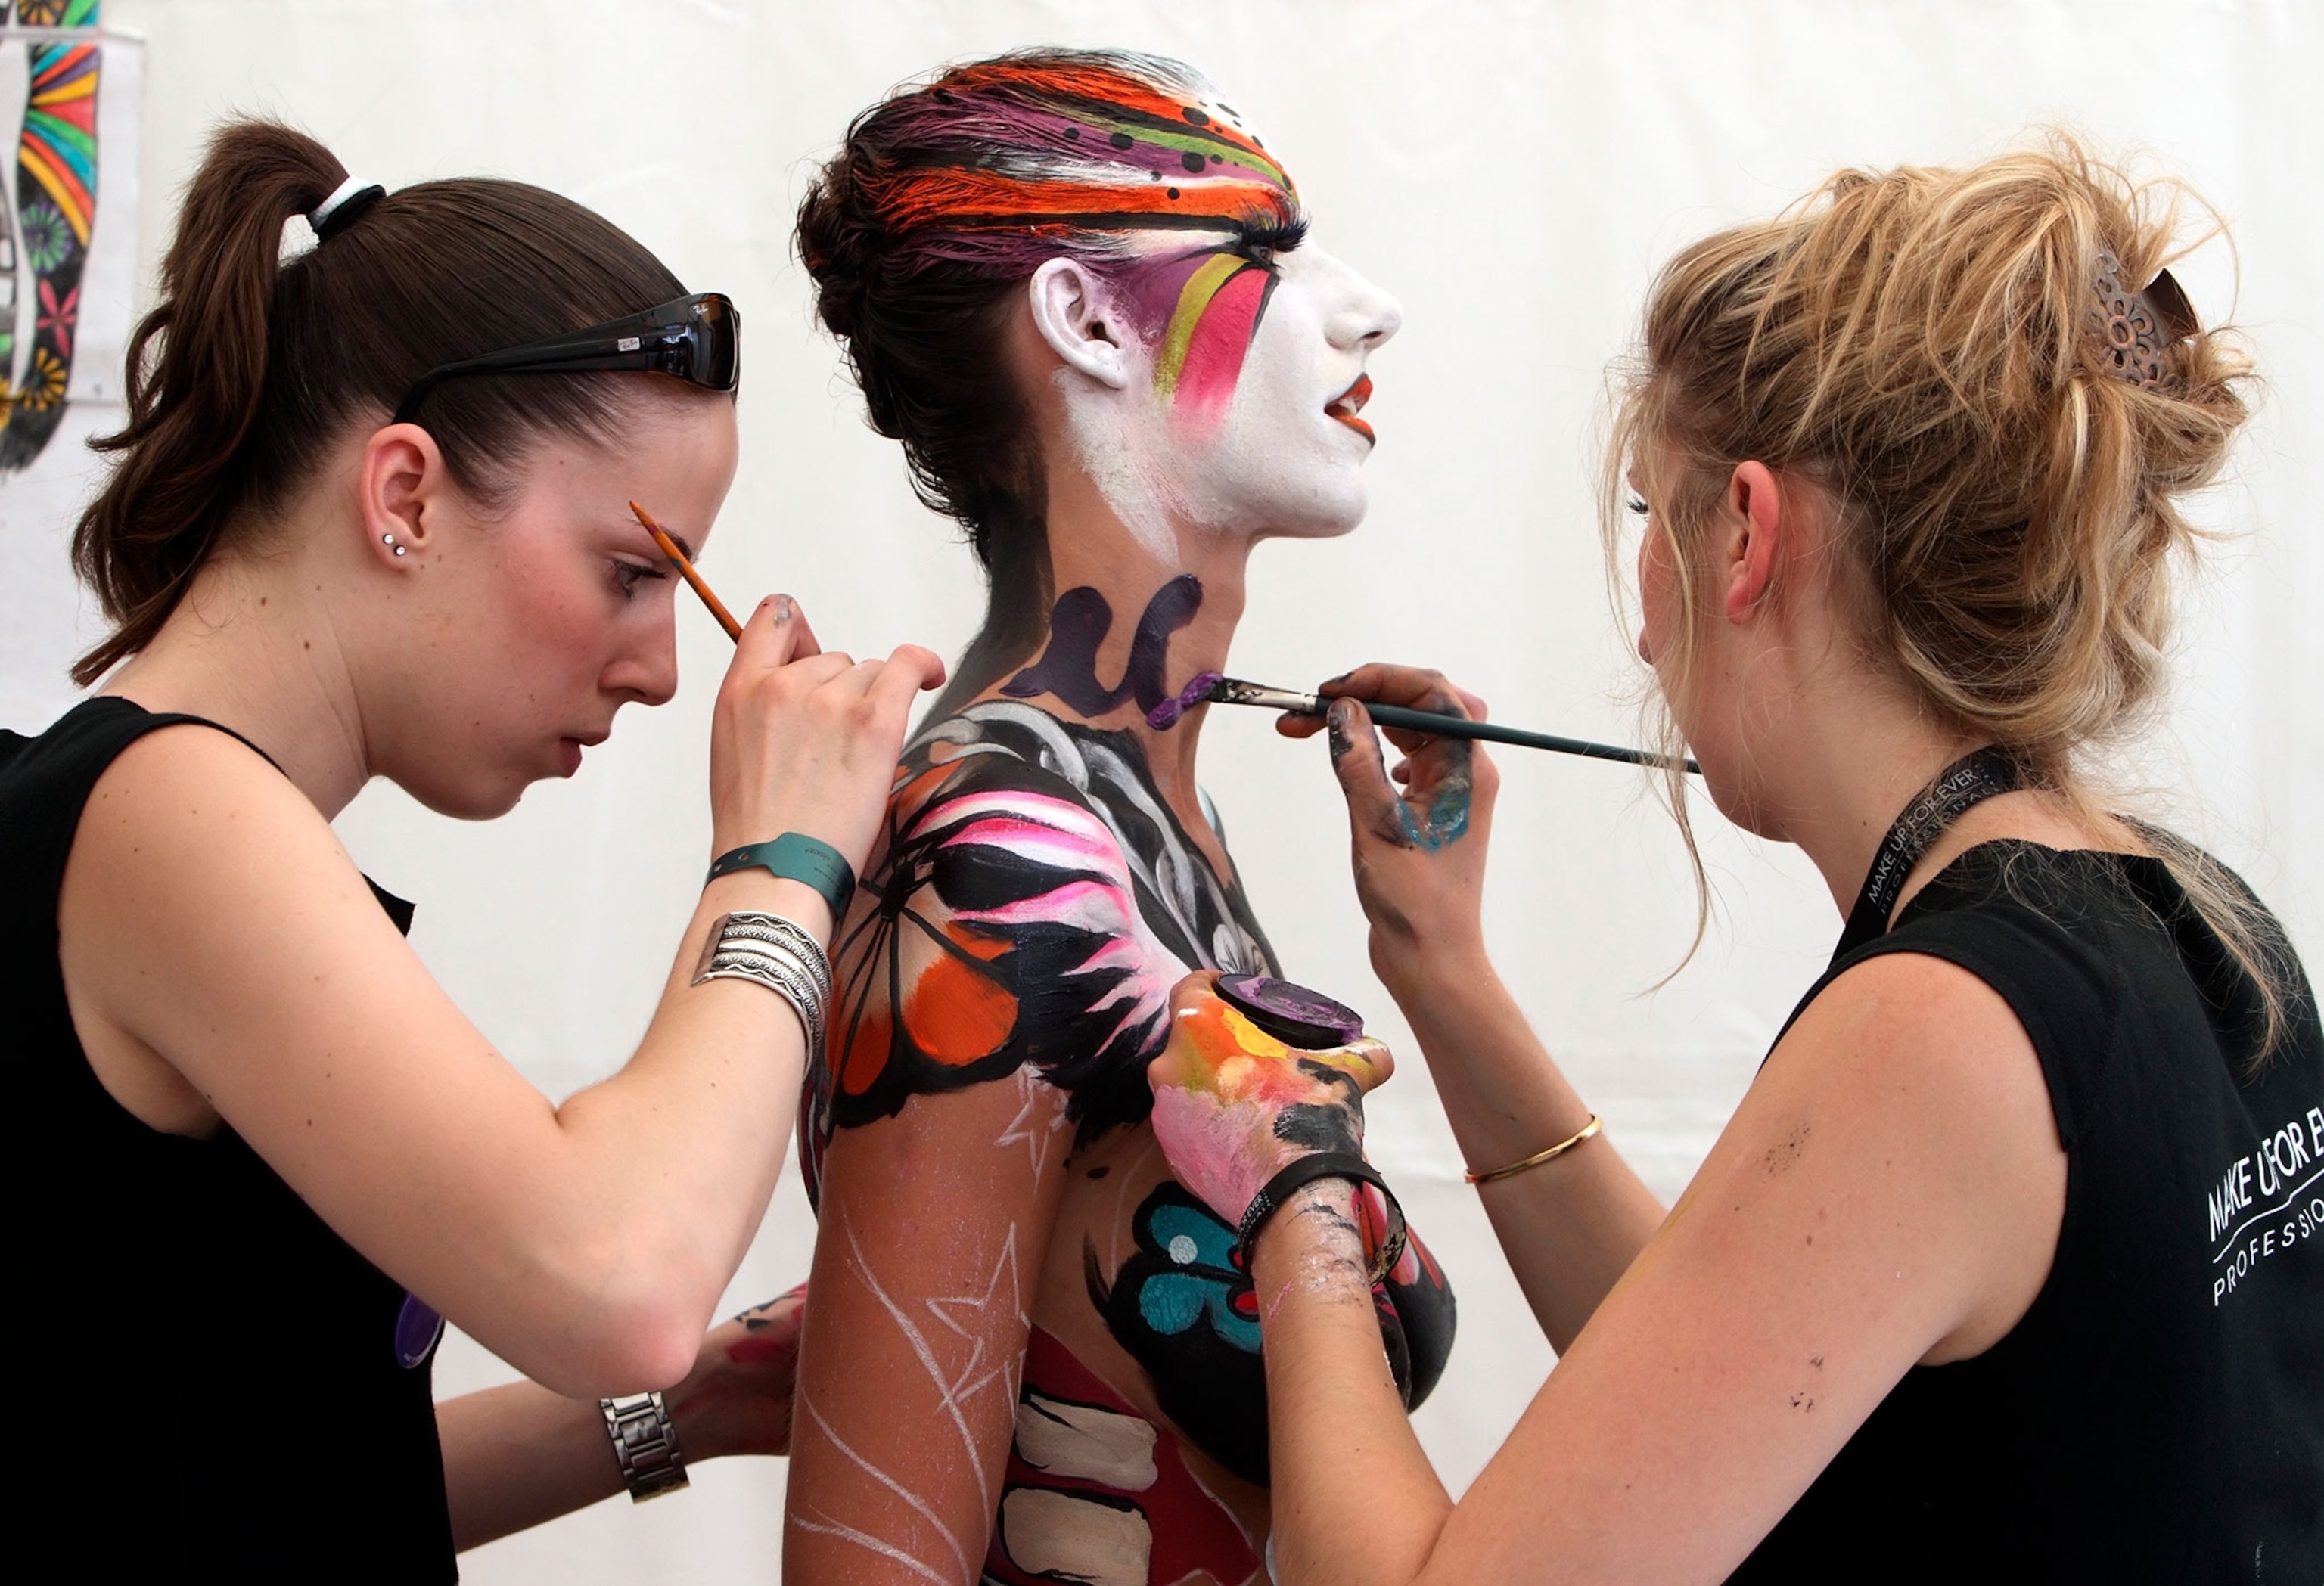 cory fenter recommends best female body painting photos pic